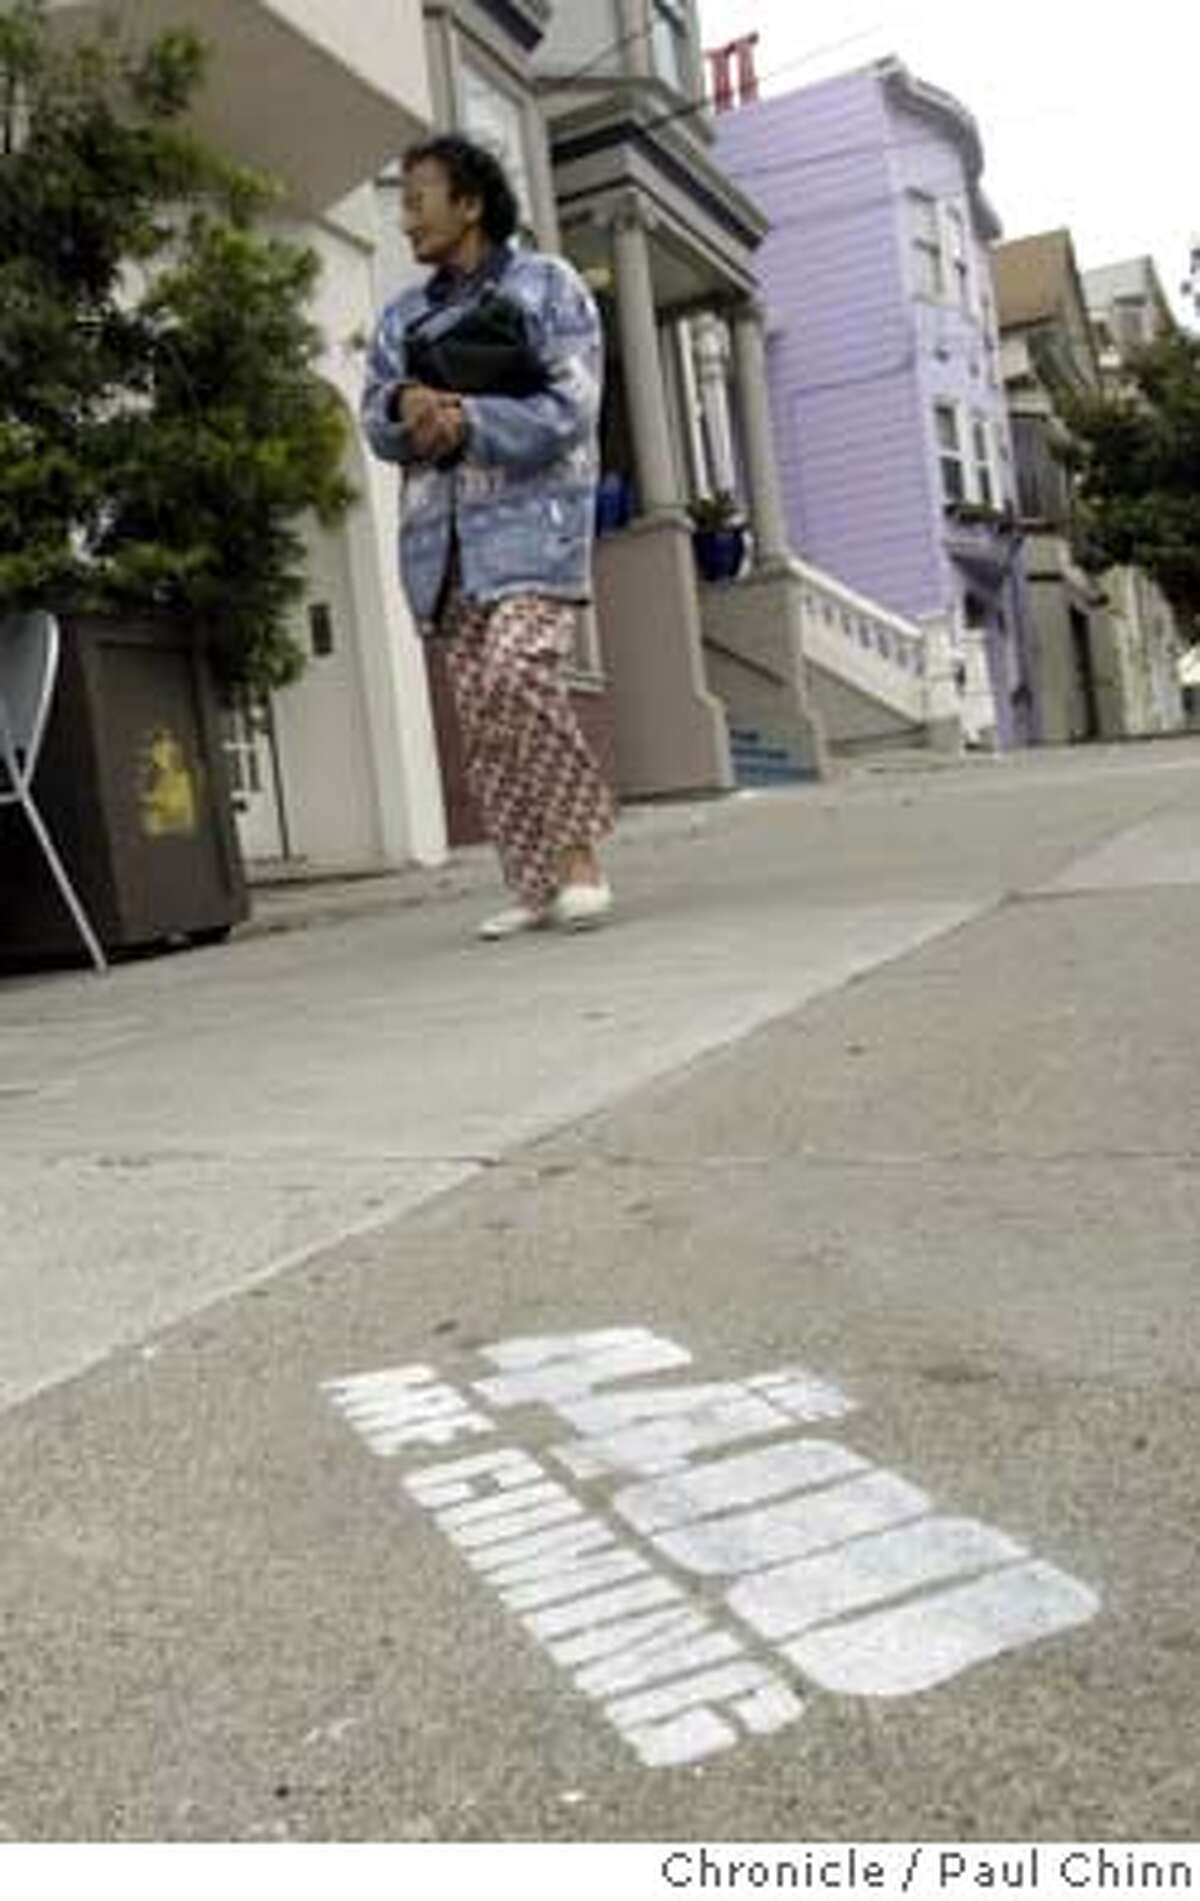 graffiti24_023_pc.jpg A pedestrian walks near an advertisement spray-painted on the sidewalk promoting a new science fiction TV series. The city is demanding the network reimburse the costs for removing the ads. Sidewalk graffiti advertising a cable TV series at 24th and Noe in San Francisco on 7/23/04. PAUL CHINN/The Chronicle MANDATORY CREDIT FOR PHOTOG AND S.F. CHRONICLE/ - MAGS OUT